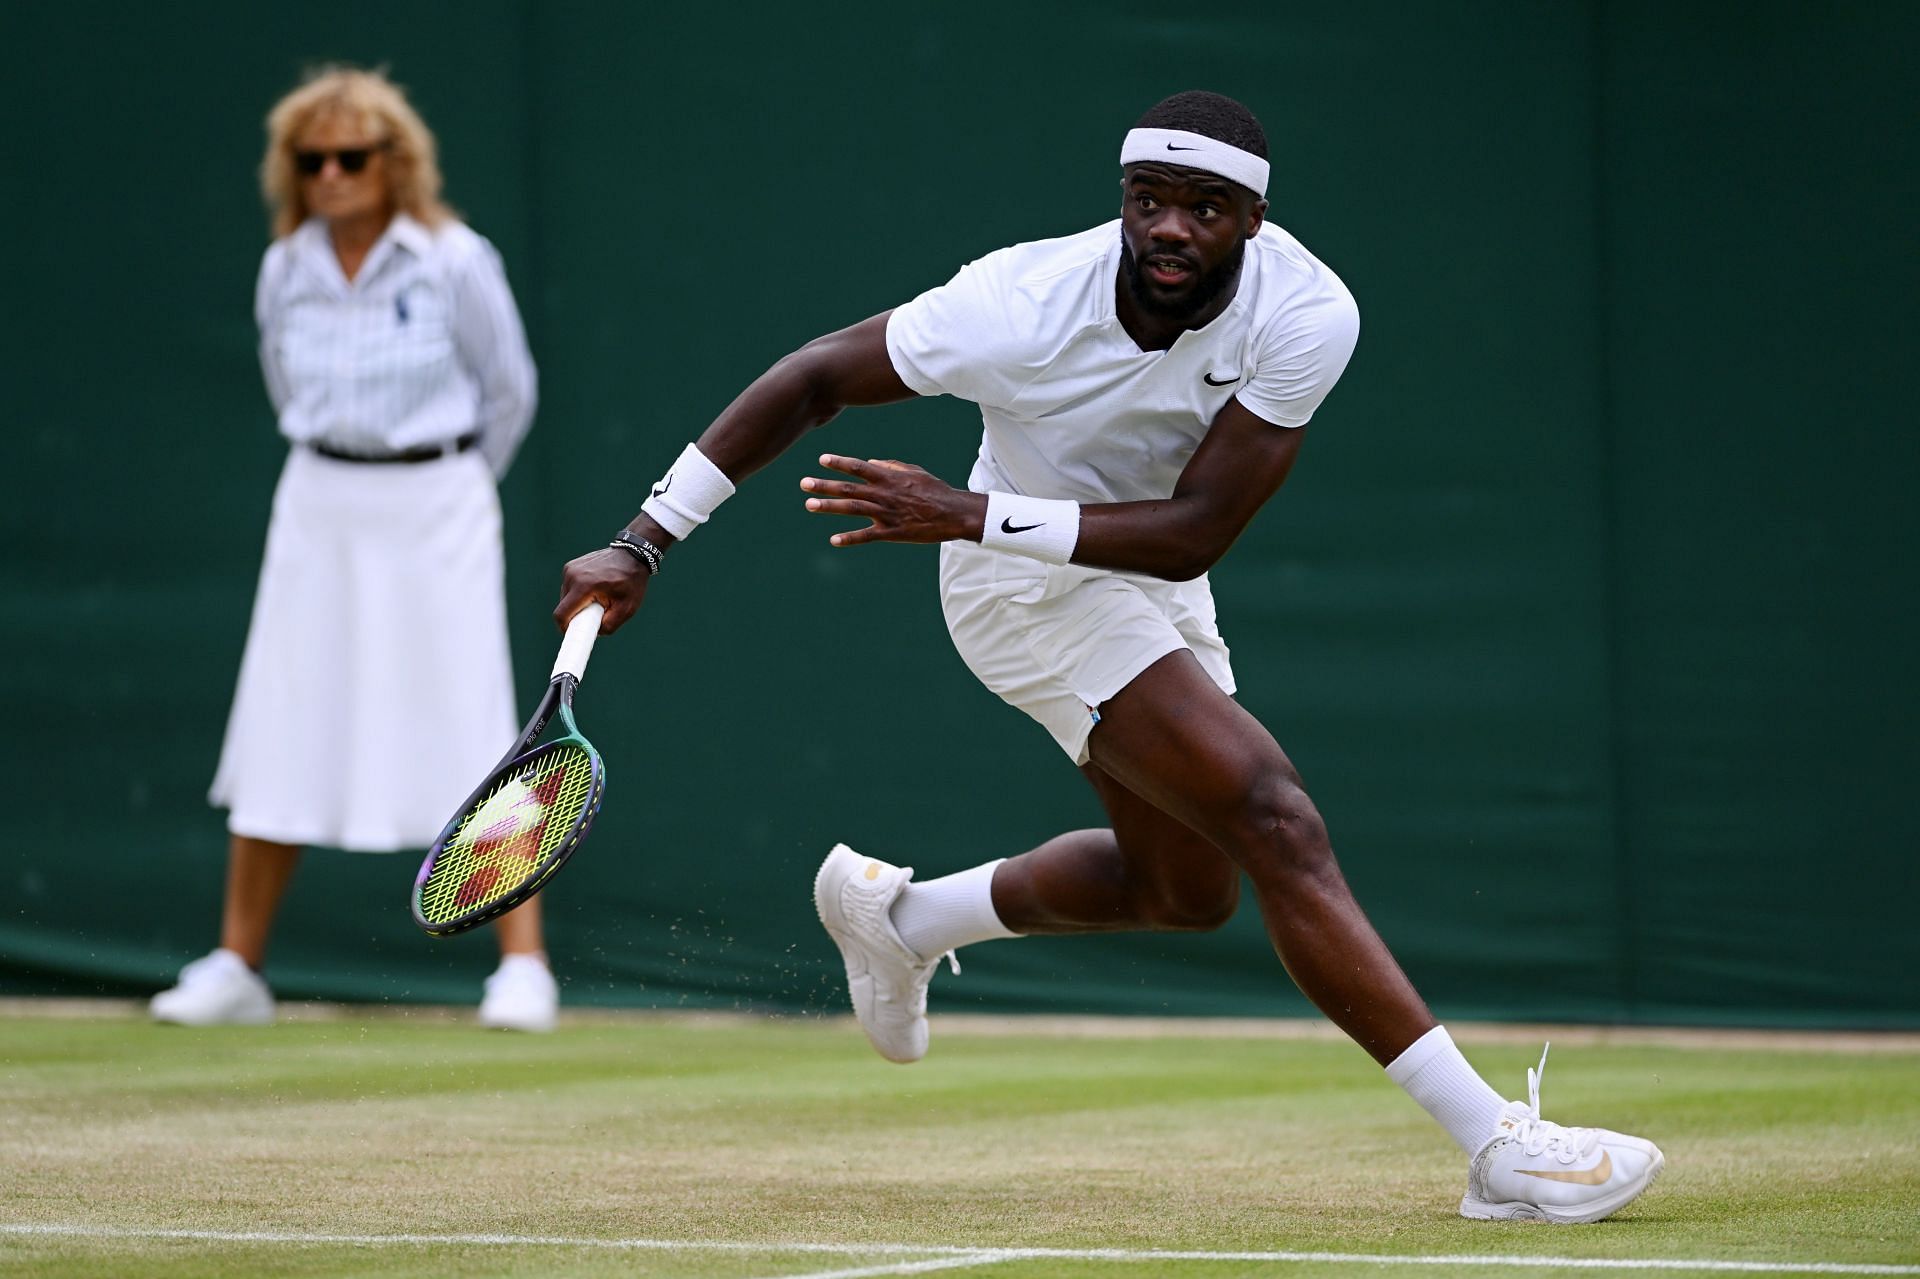 Frances Tiafoe and Tommy Paul booked their places in the quarterfinals of the Atlanta Open